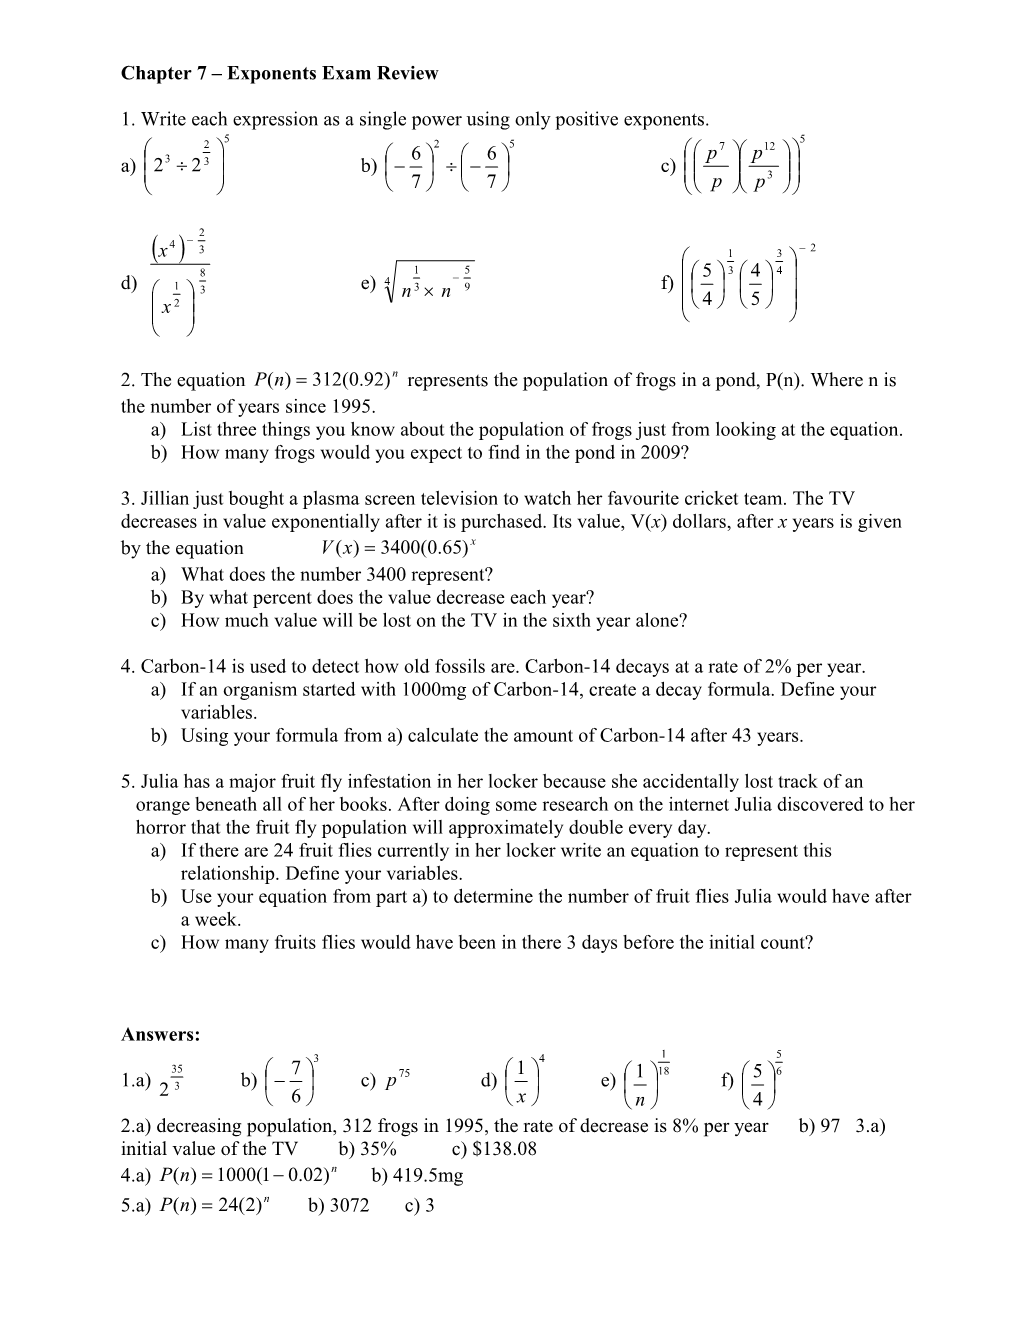 Chapter 7 Exponents Exam Review